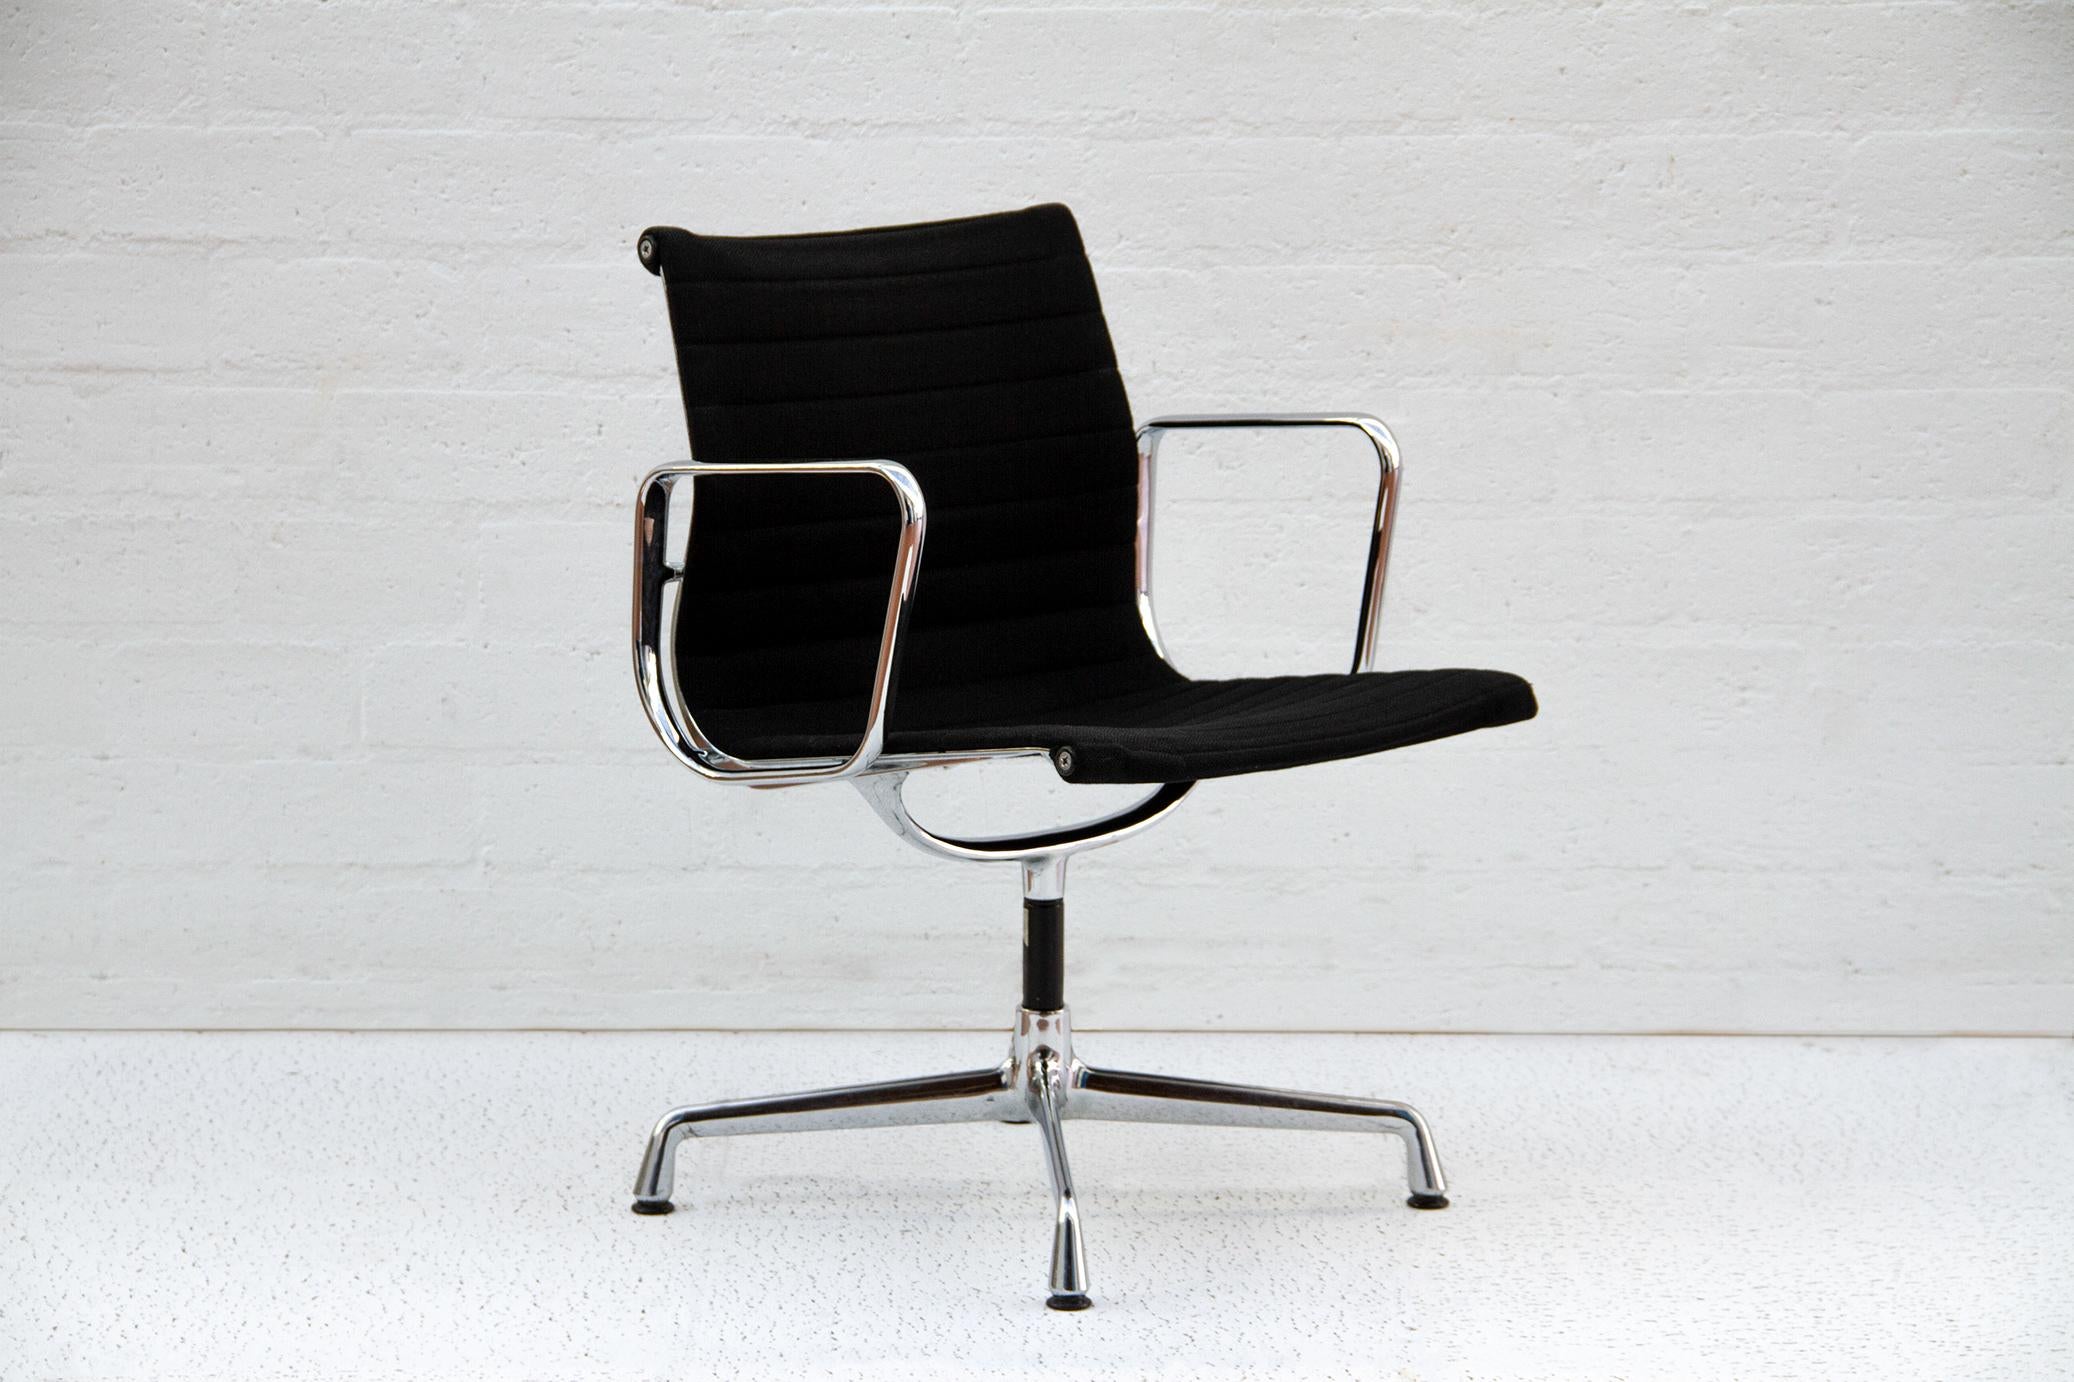 The EA 108 office chair is one of the greatest design furniture of the 20th century. The EA 108 office chair by Charles and Ray Eames need no introduction. An iconic object designed in 1958 that remain timeless over the years. Still, today after